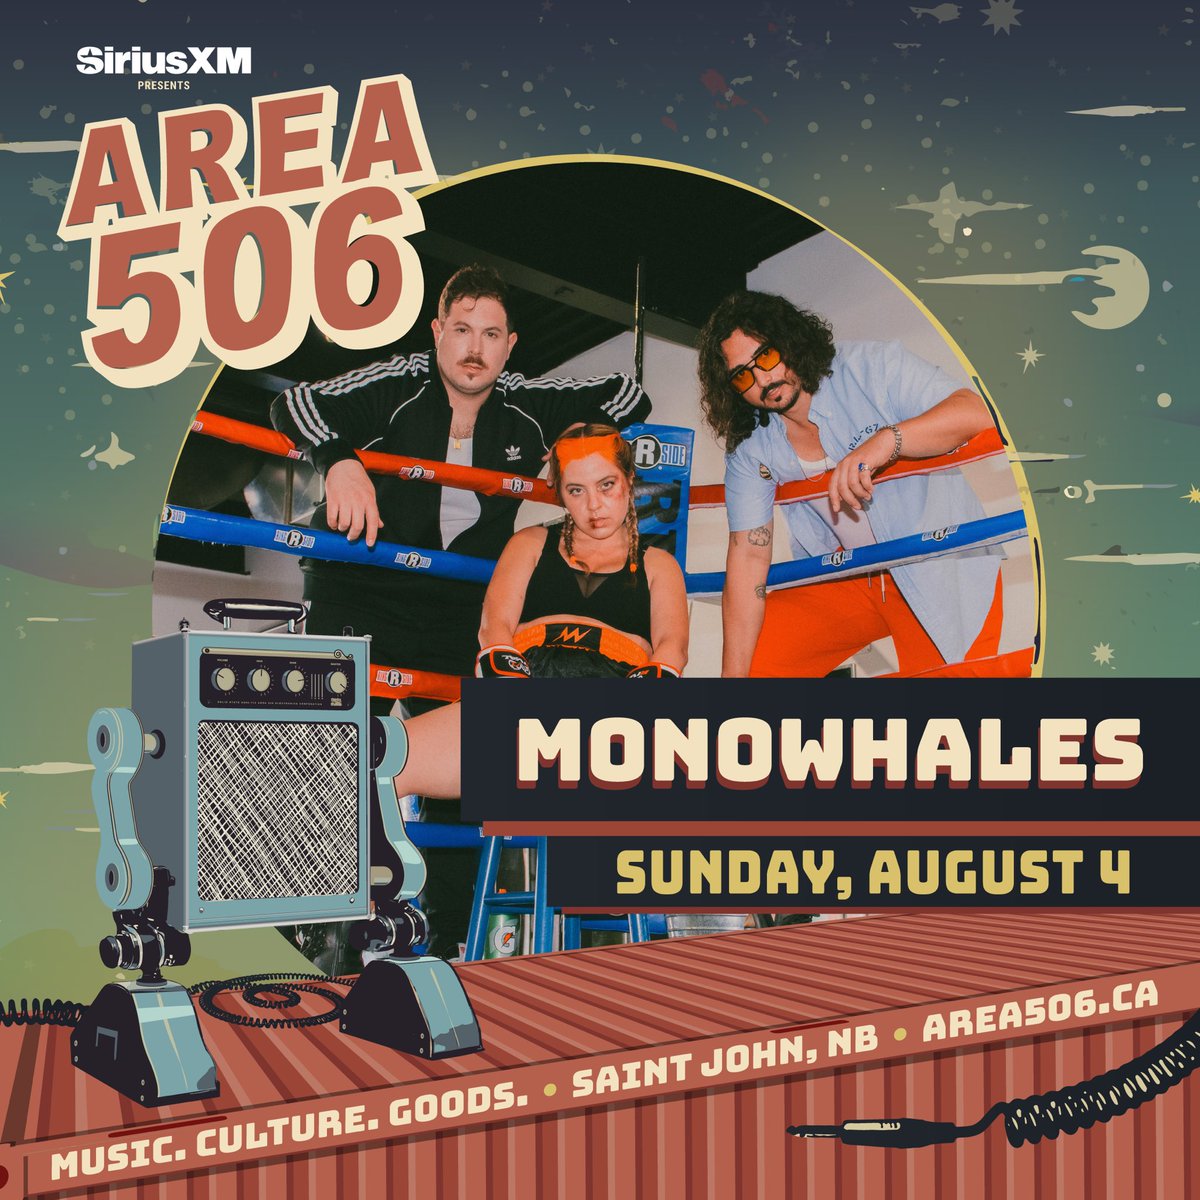 NEW BRUNSWICK 🤖 Stoked to announce that we will be playing the iconic @area506fest this summer 🔥 AND with a pretty stacked lineup too 👀 join us for the best august long weekend of ur livessss 💋 TICKETS ON SALE @ 5PM TODAY 🔗 area506.ca